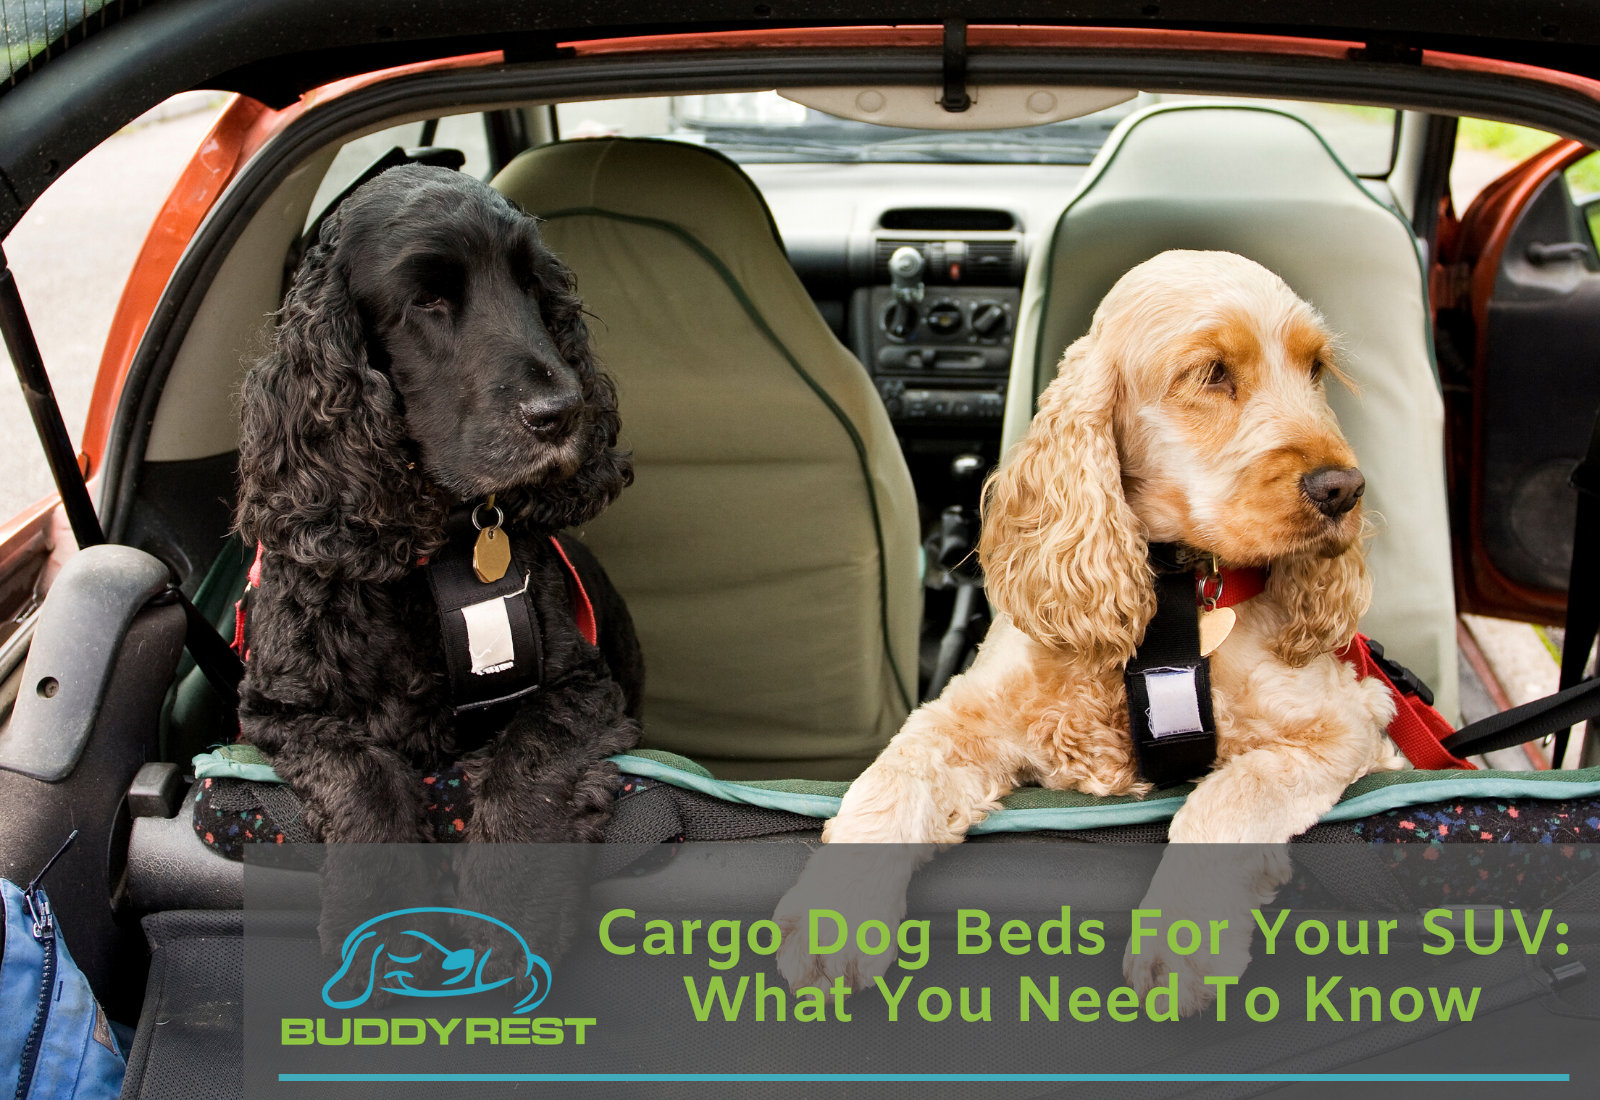 Cargo Dog Beds for Your SUV: What You Need to Know